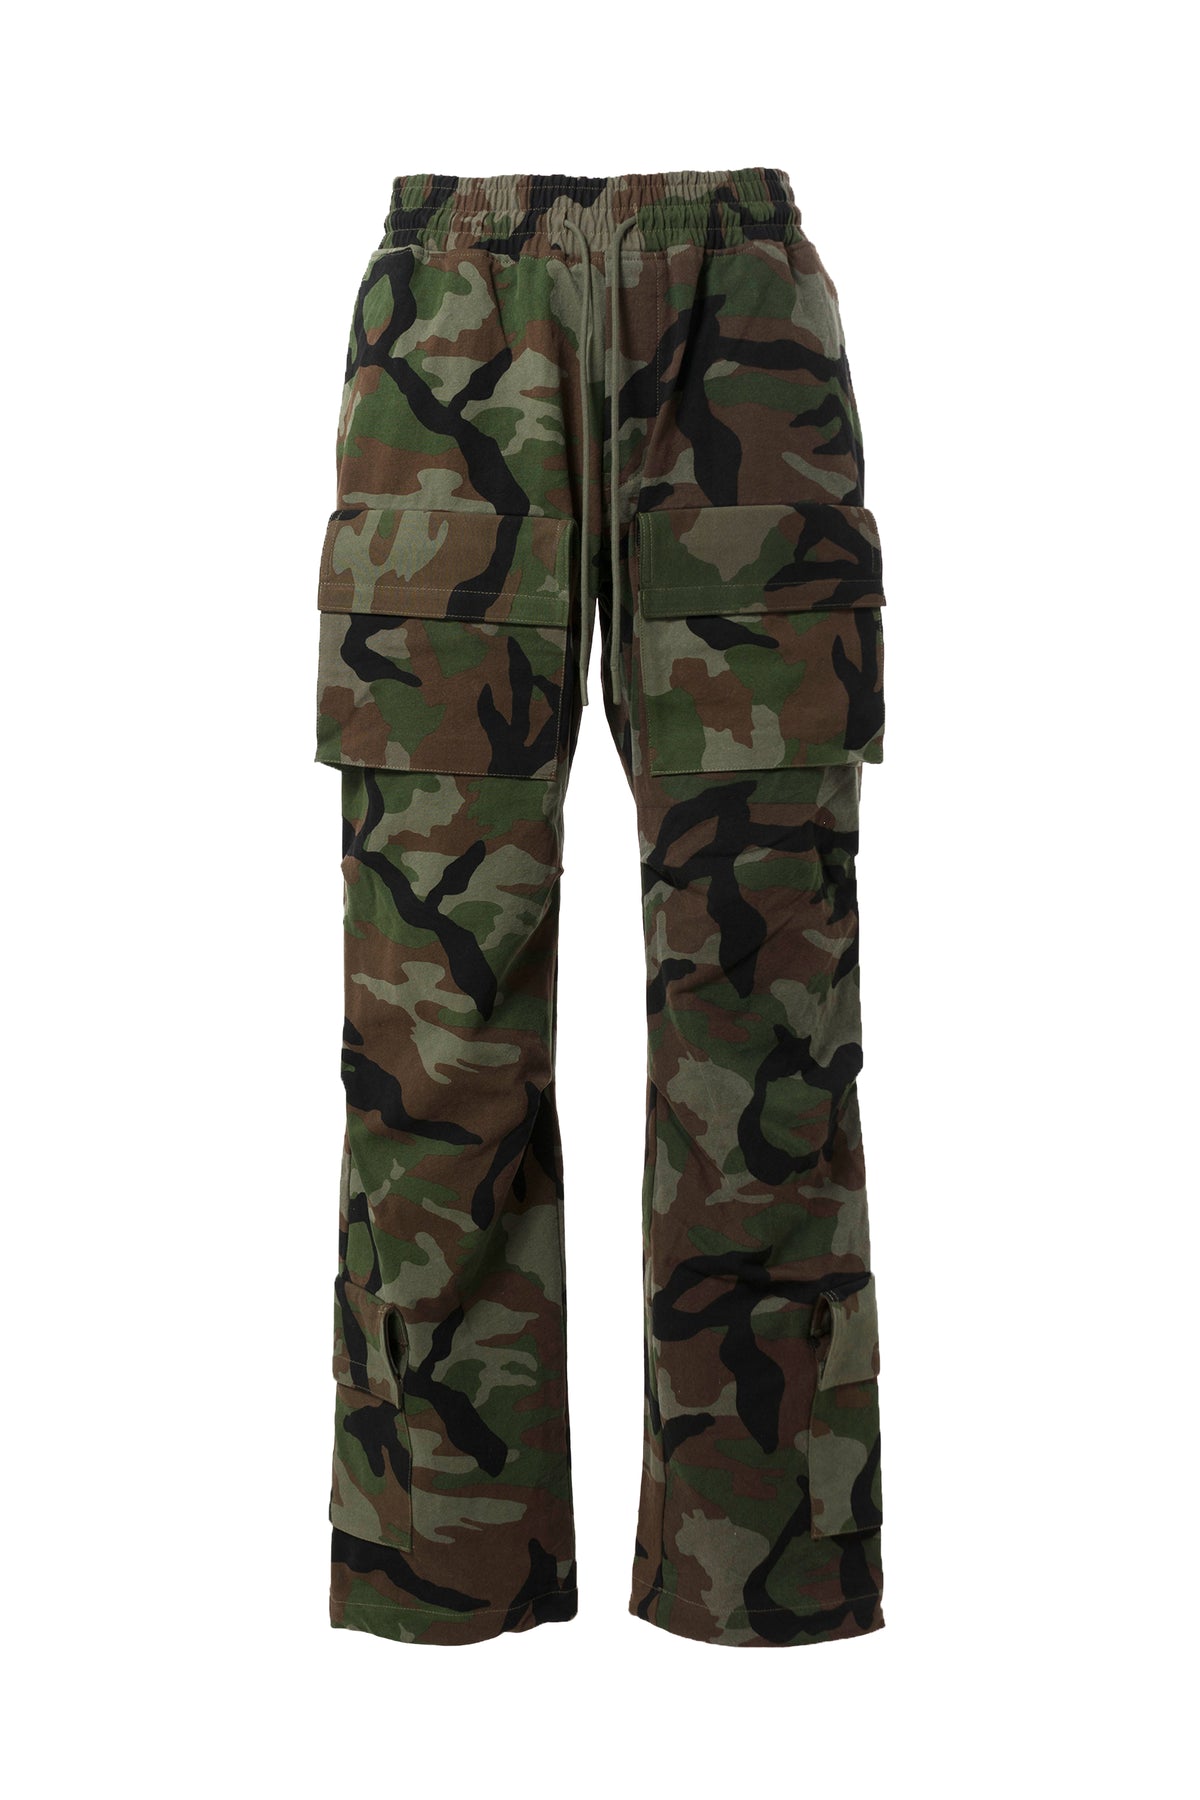 Readymade × Fear of god military pants M